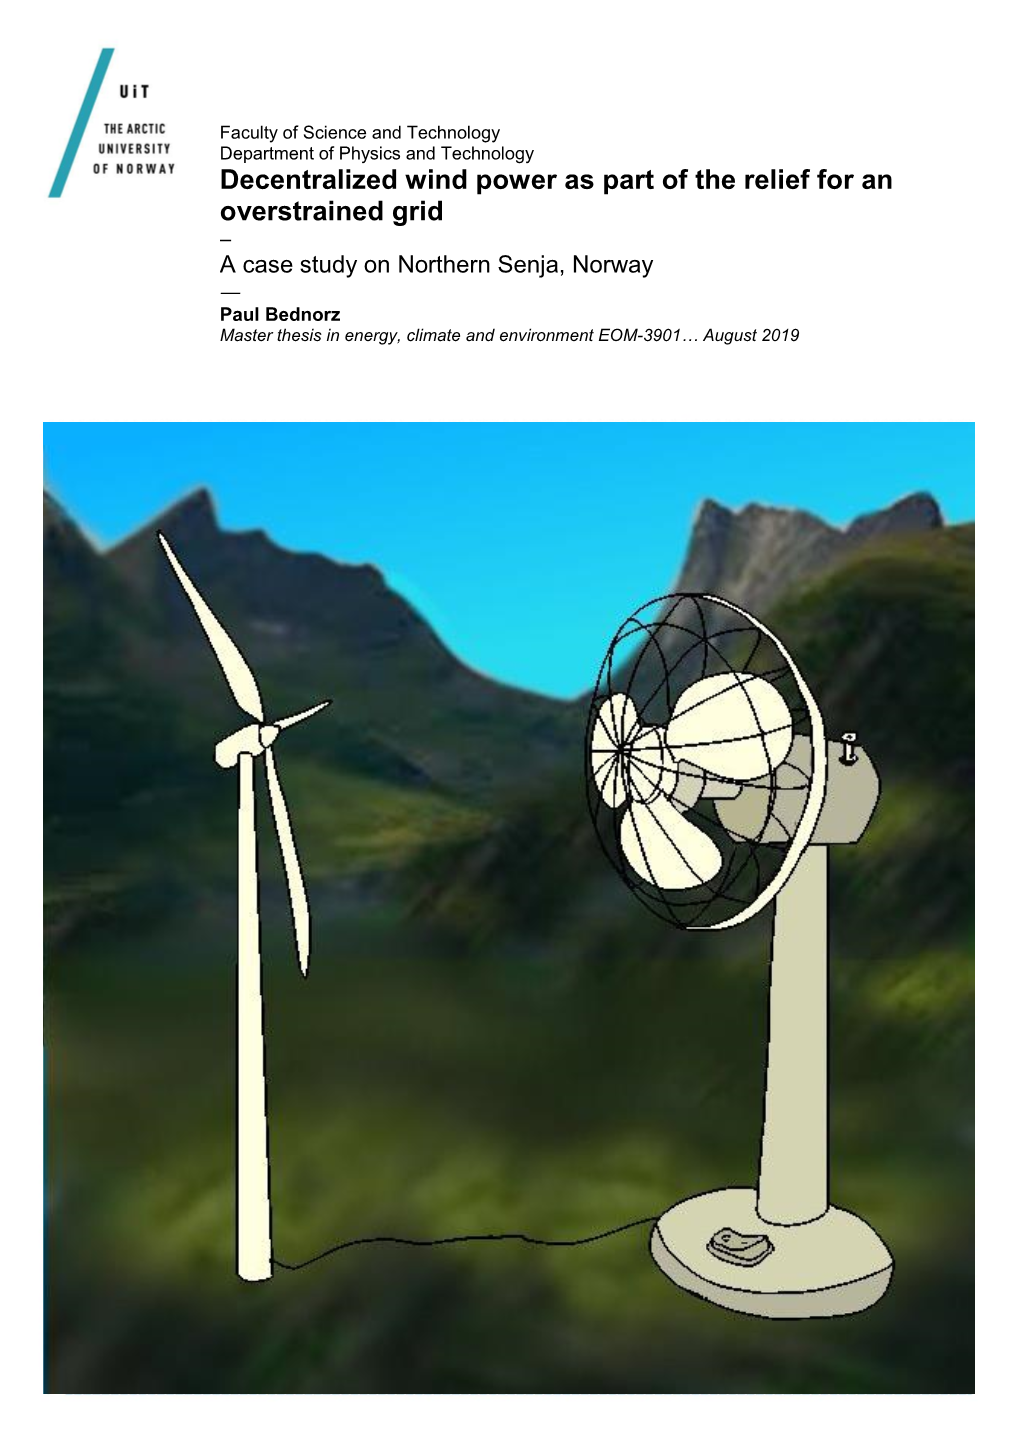 Decentralized Wind Power As Part of the Relief for an Overstrained Grid